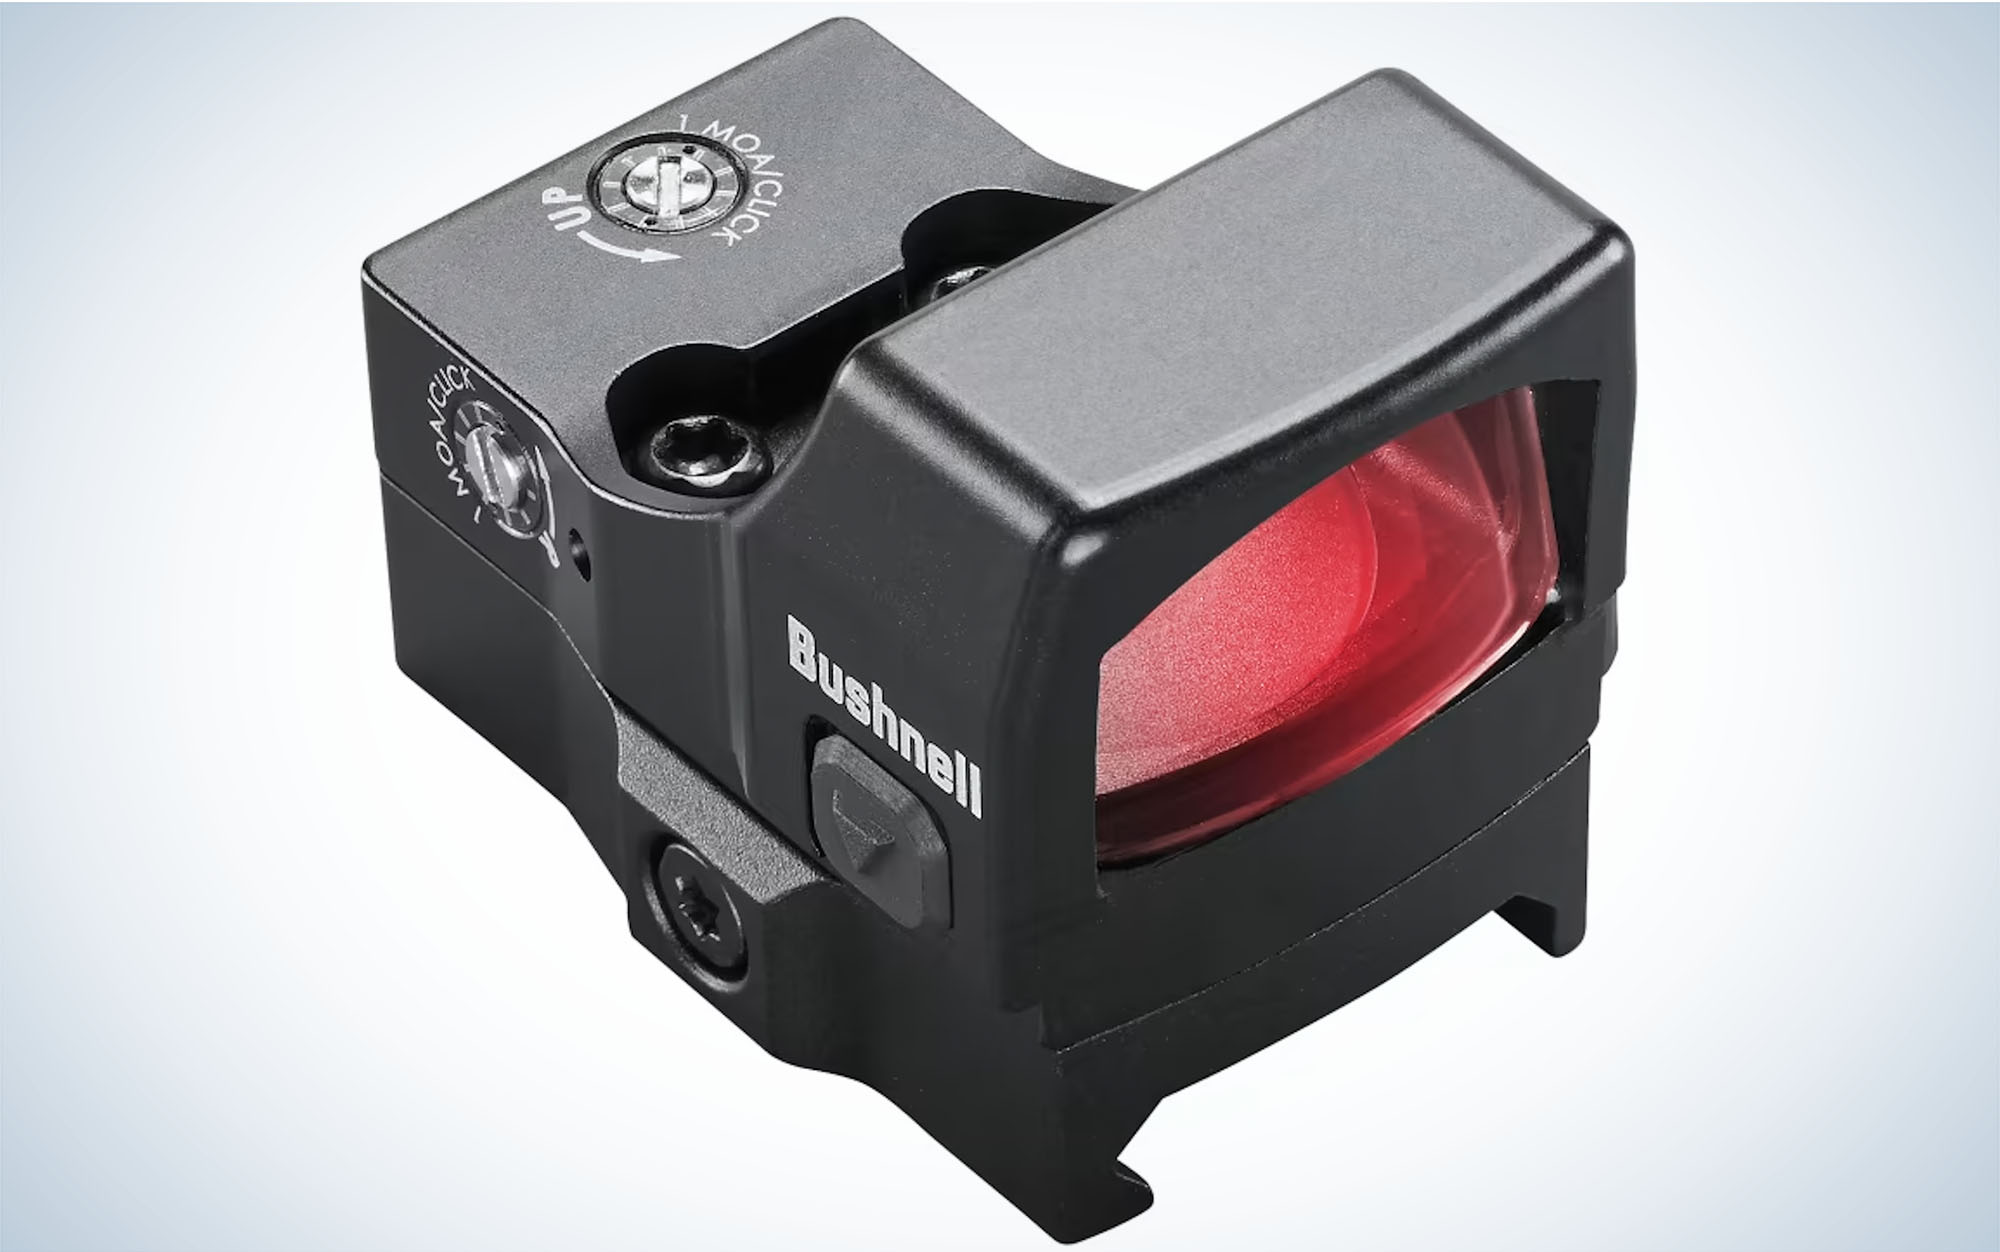 The Bushnell RXS-250 is the best value red dot sight for turkey hunting.